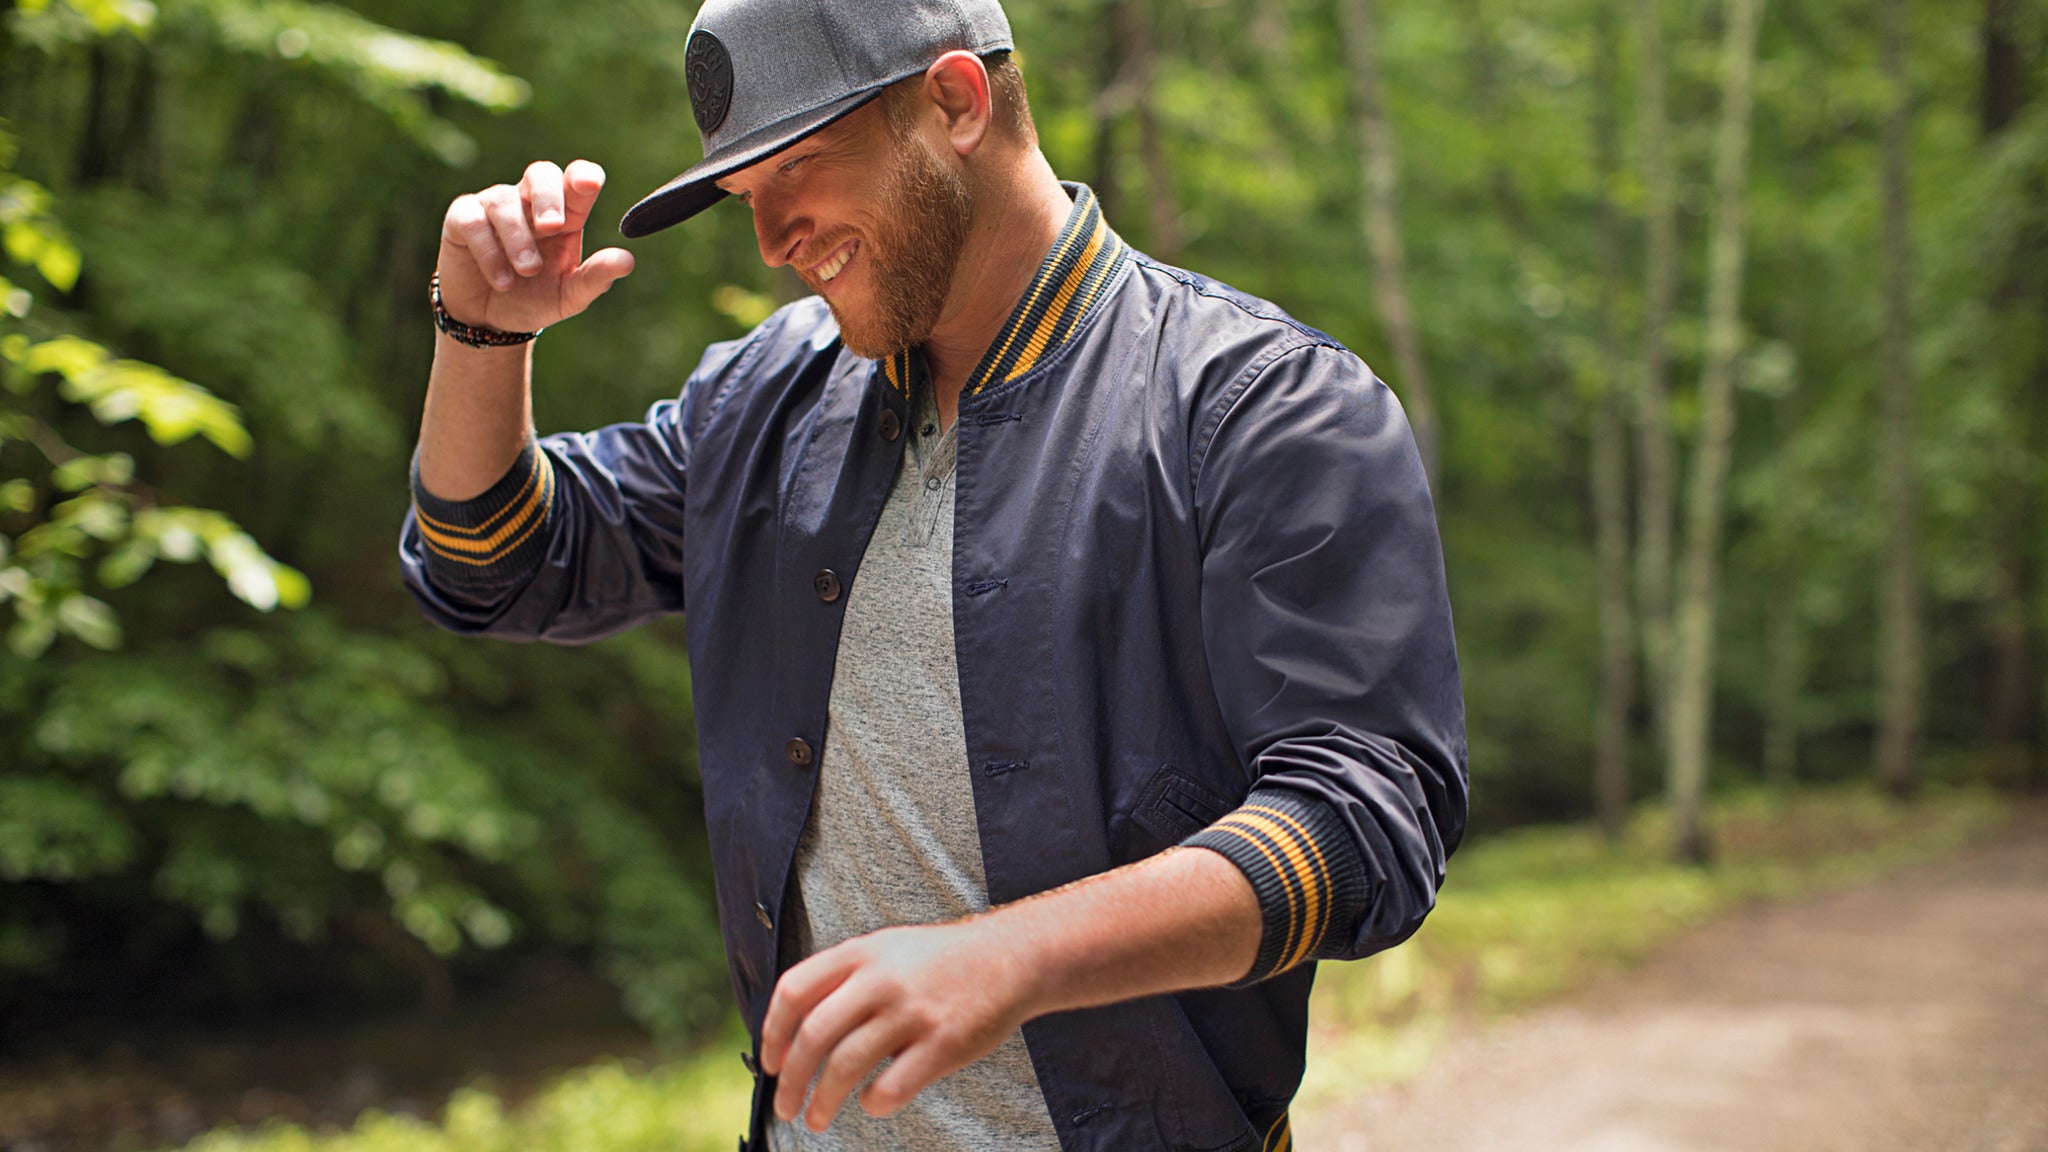 Cole Swindell in Council Bluffs promo photo for Fan Club / Total Rewards presale offer code